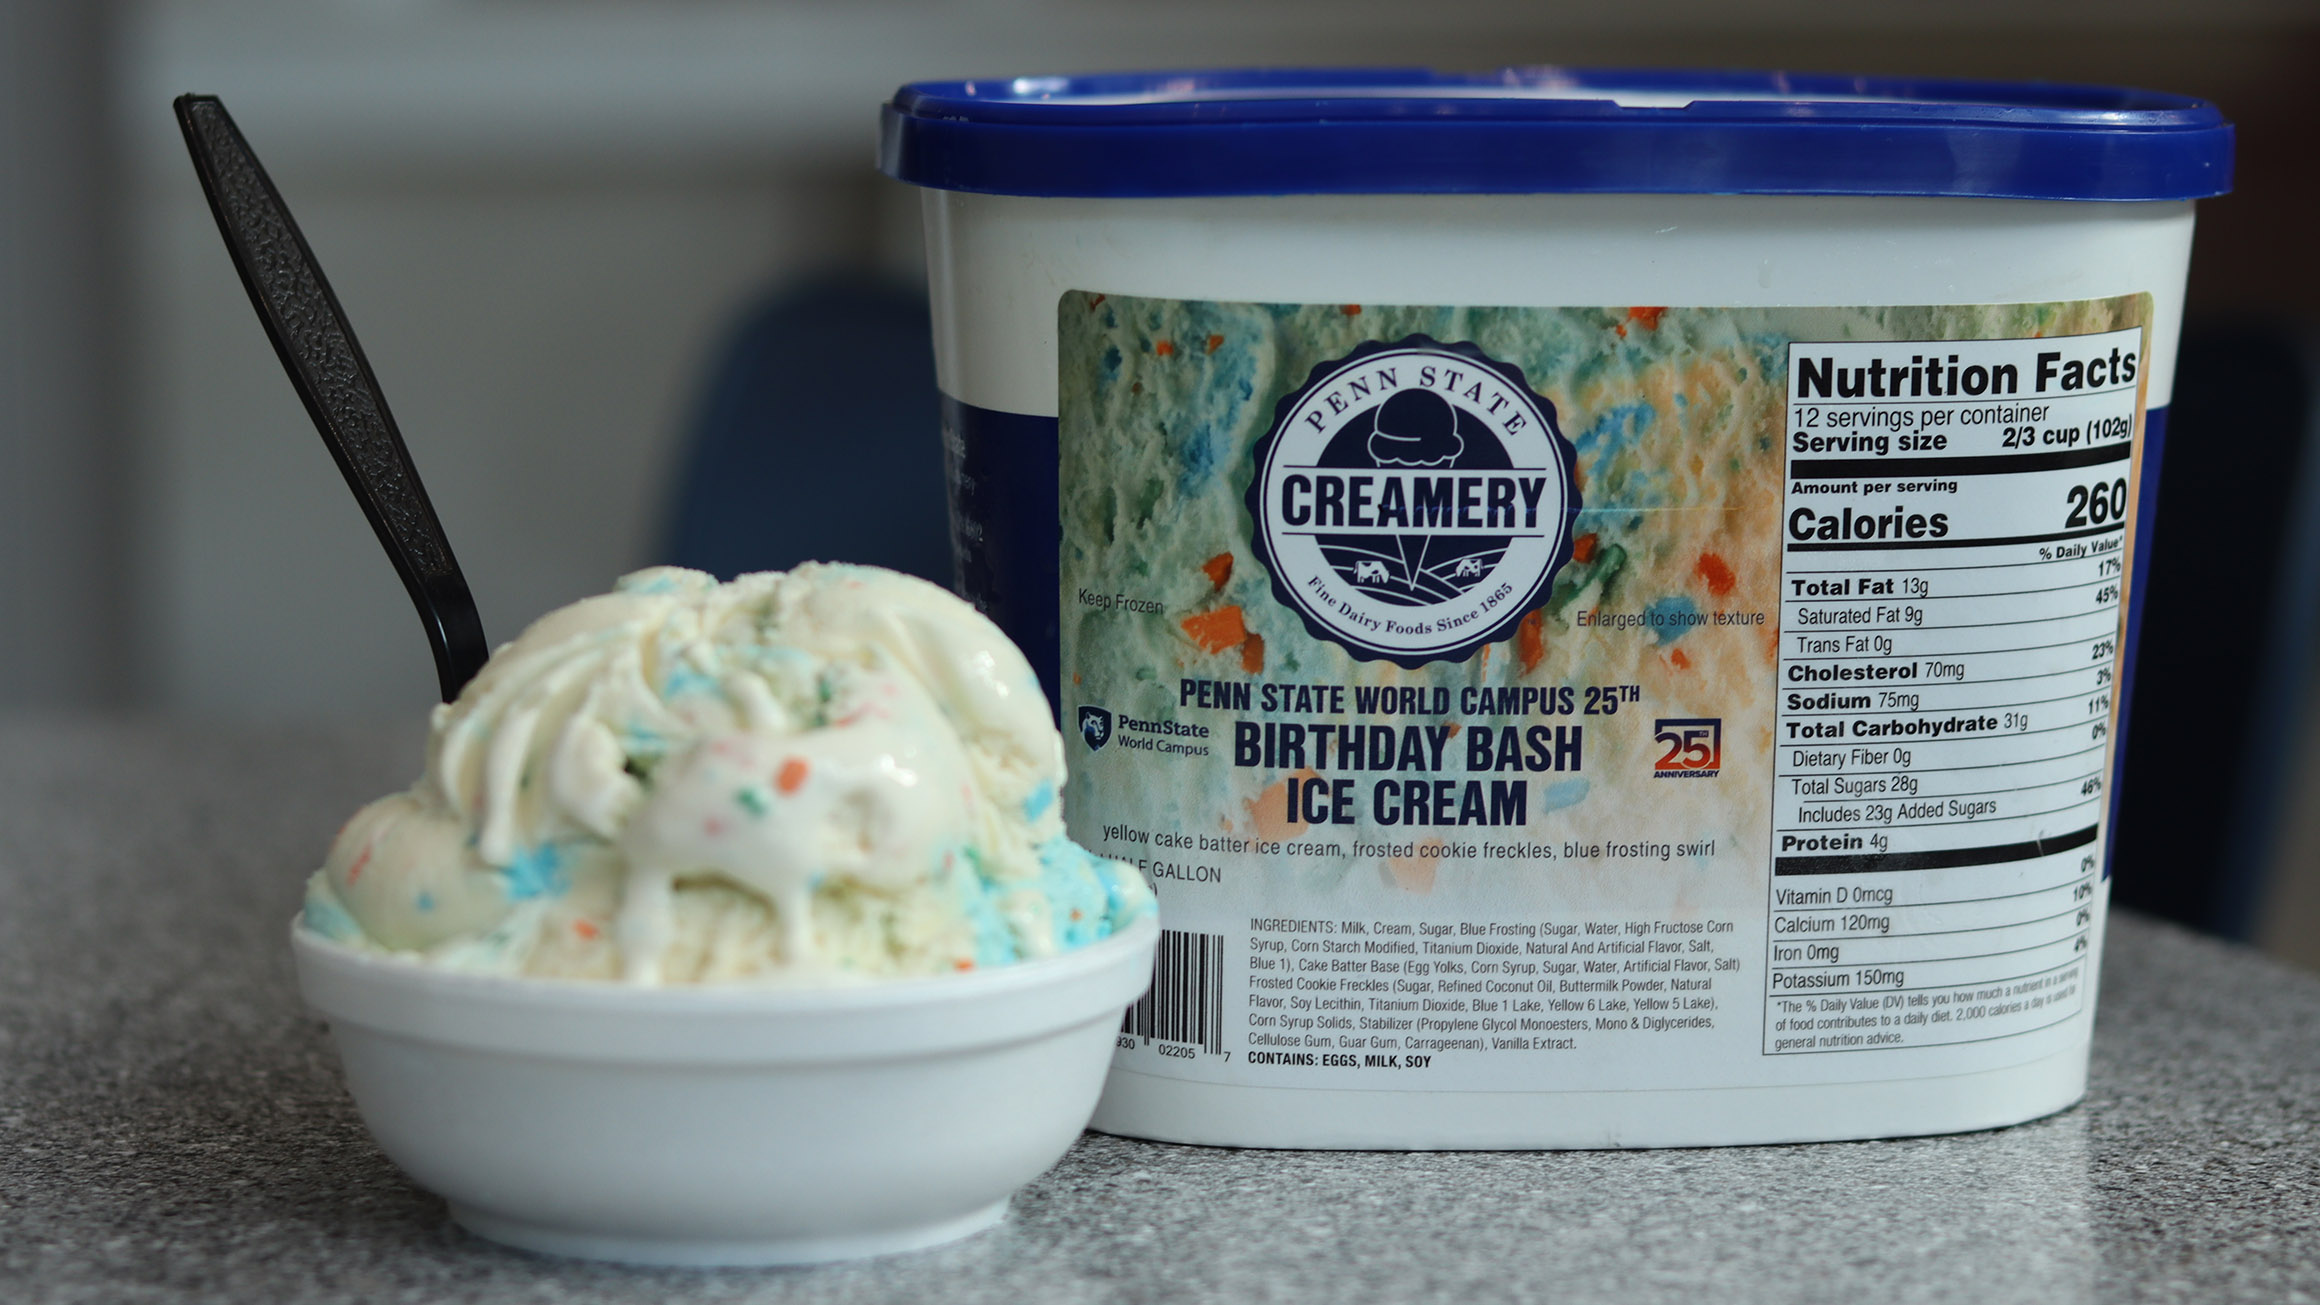 a dish of ice cream with a spoon in it is showing on the left, and a carton of Penn State World Campus 25th Birthday Bash shows on the right